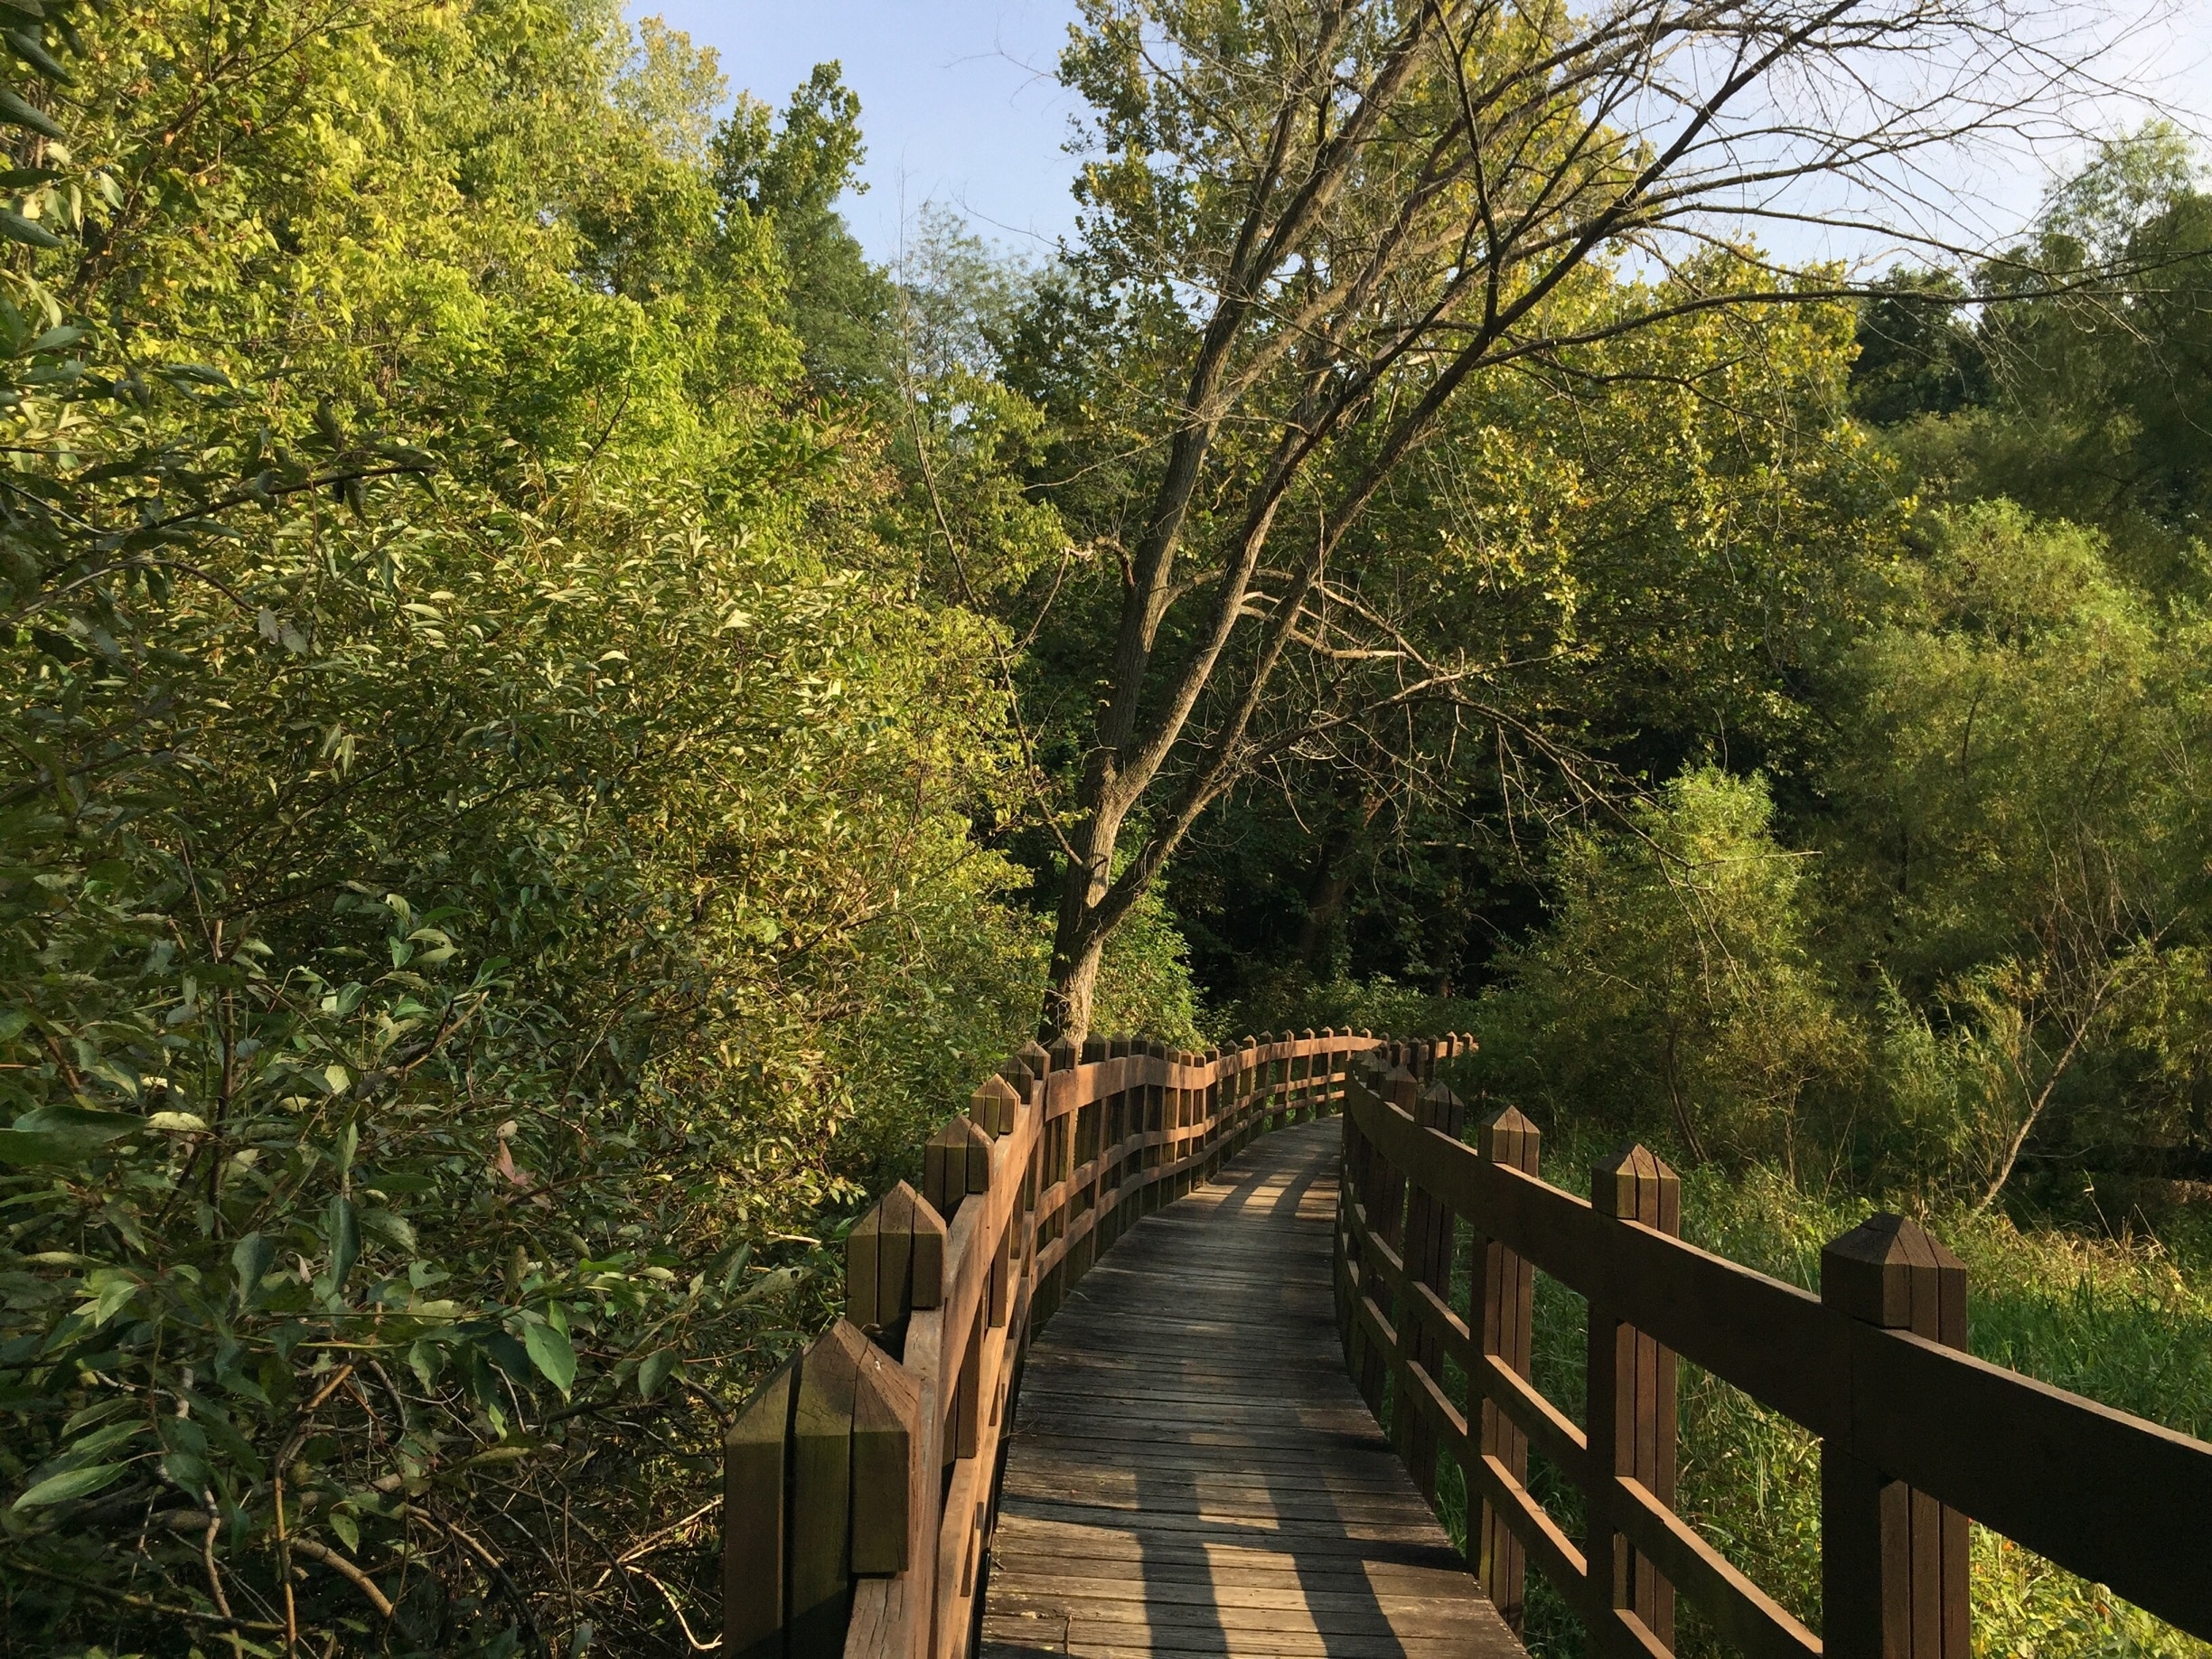 Beautiful state park with a boardwalk and hiking trails that wind around a lake shore and through a thick patch of woods. Located just off I-35, it's a great place to stretch those legs and take a break from driving.